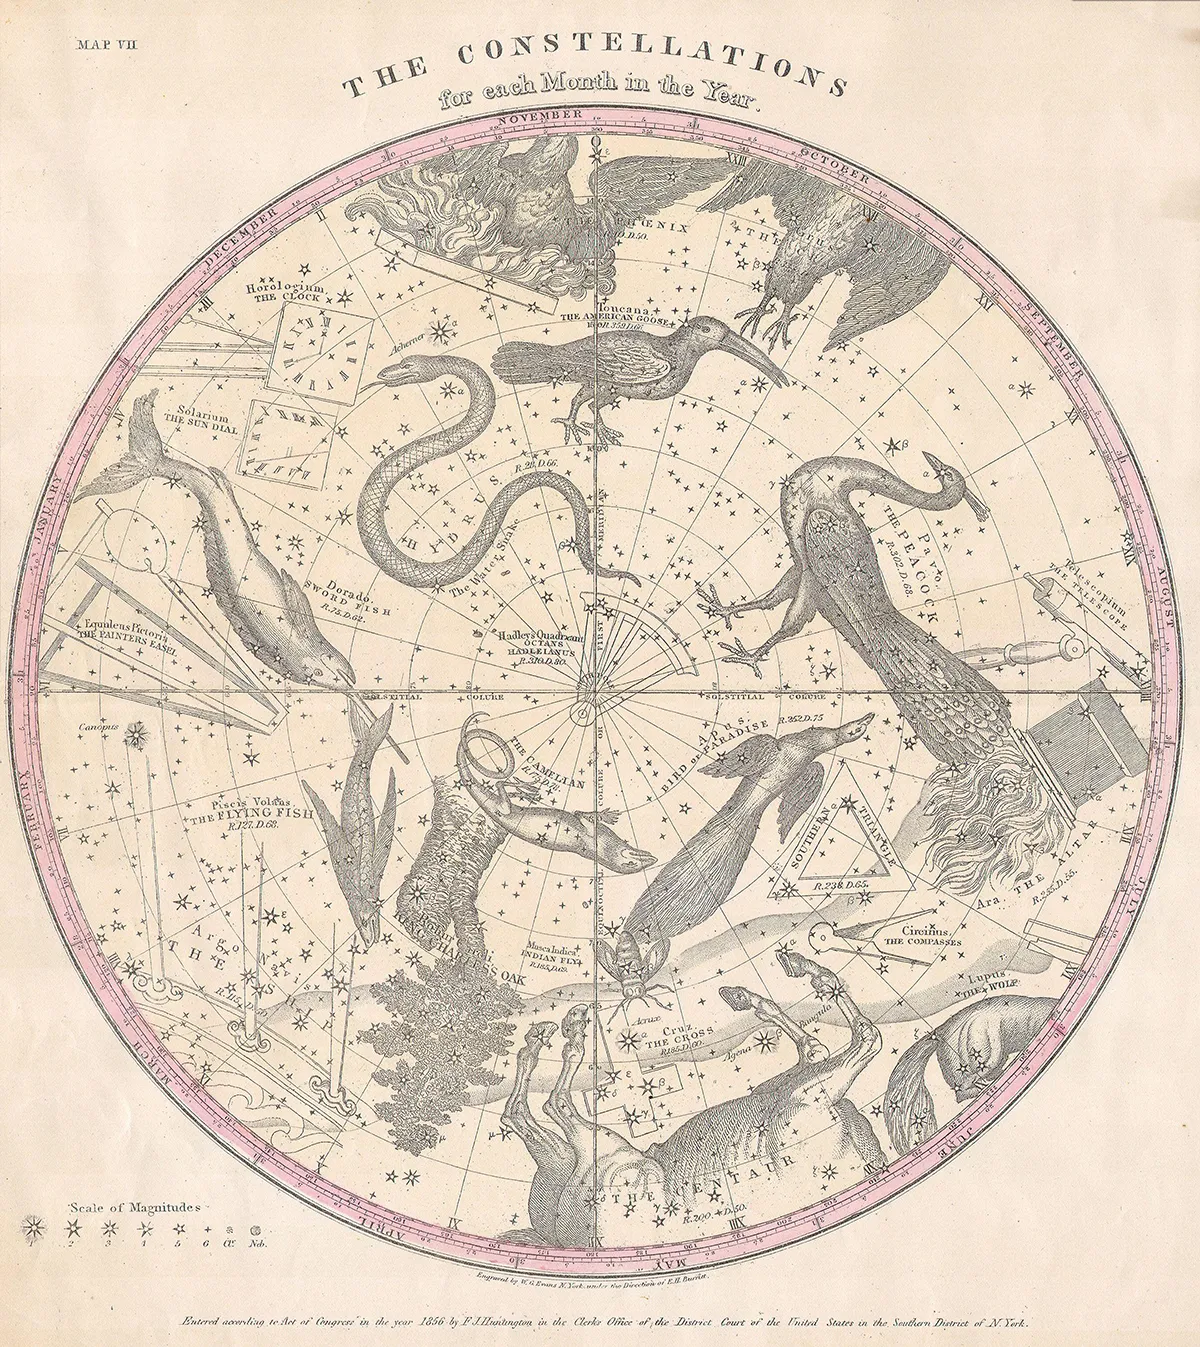 1856 Map of the stars and constellations of the Southern Hemisphere. Photo by Sepia Times / Universal Images Group via Getty Images